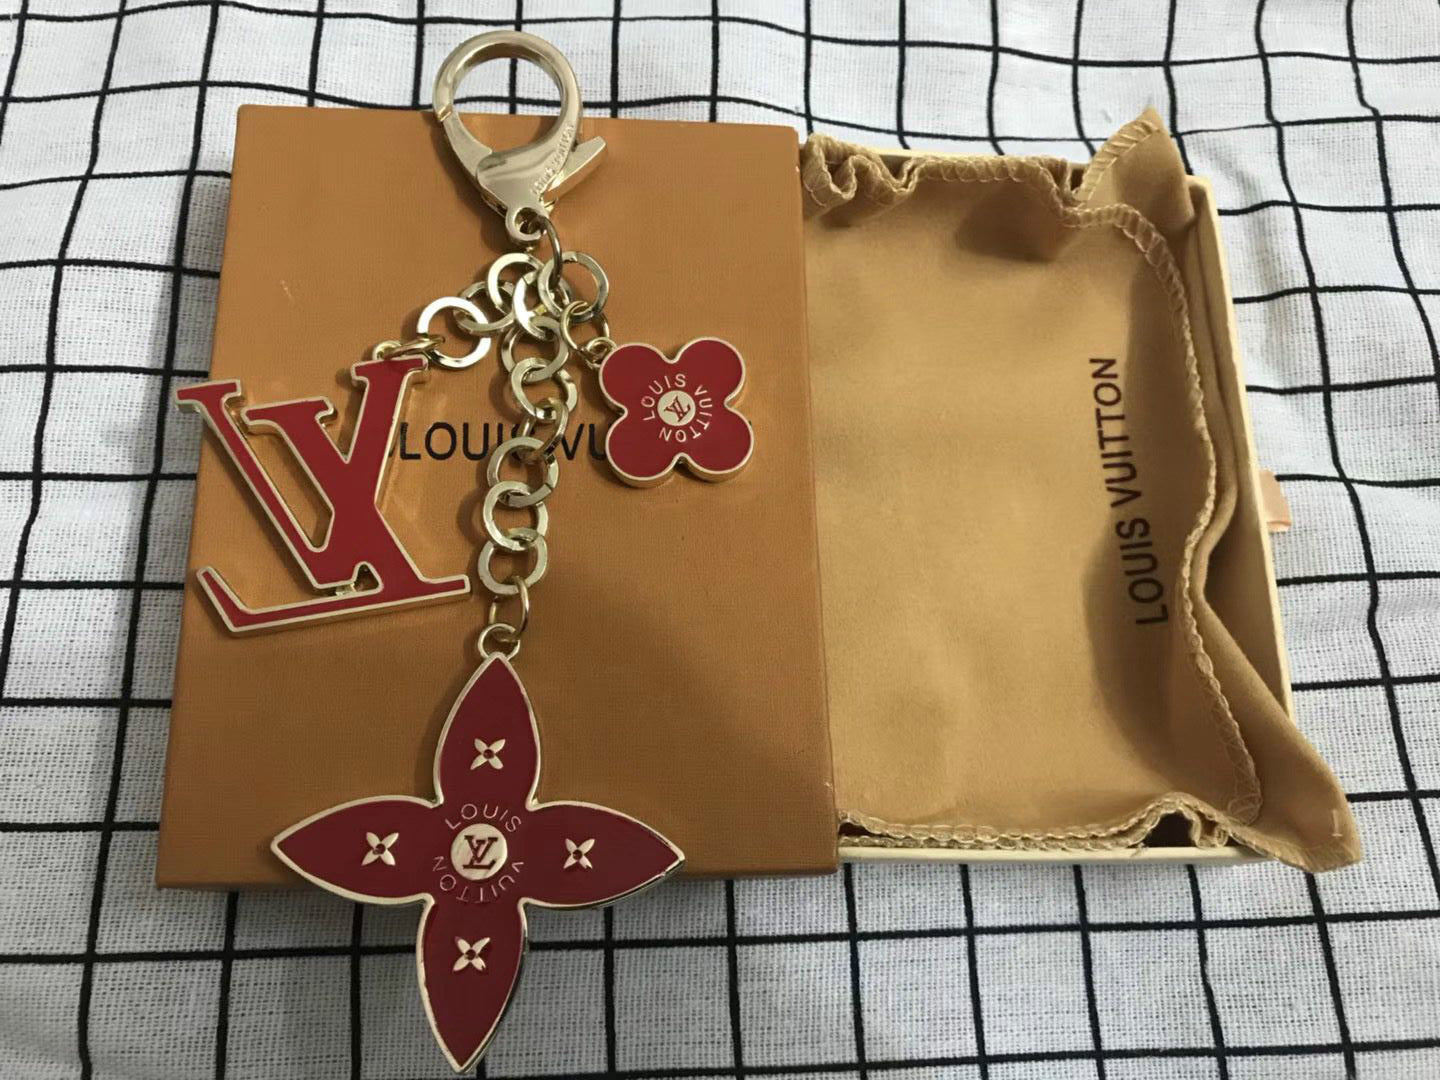 LOUIS VUITTON KIRIGAMI EPI POUCH BAG CHARM AND KEYCHAIN HOLDER